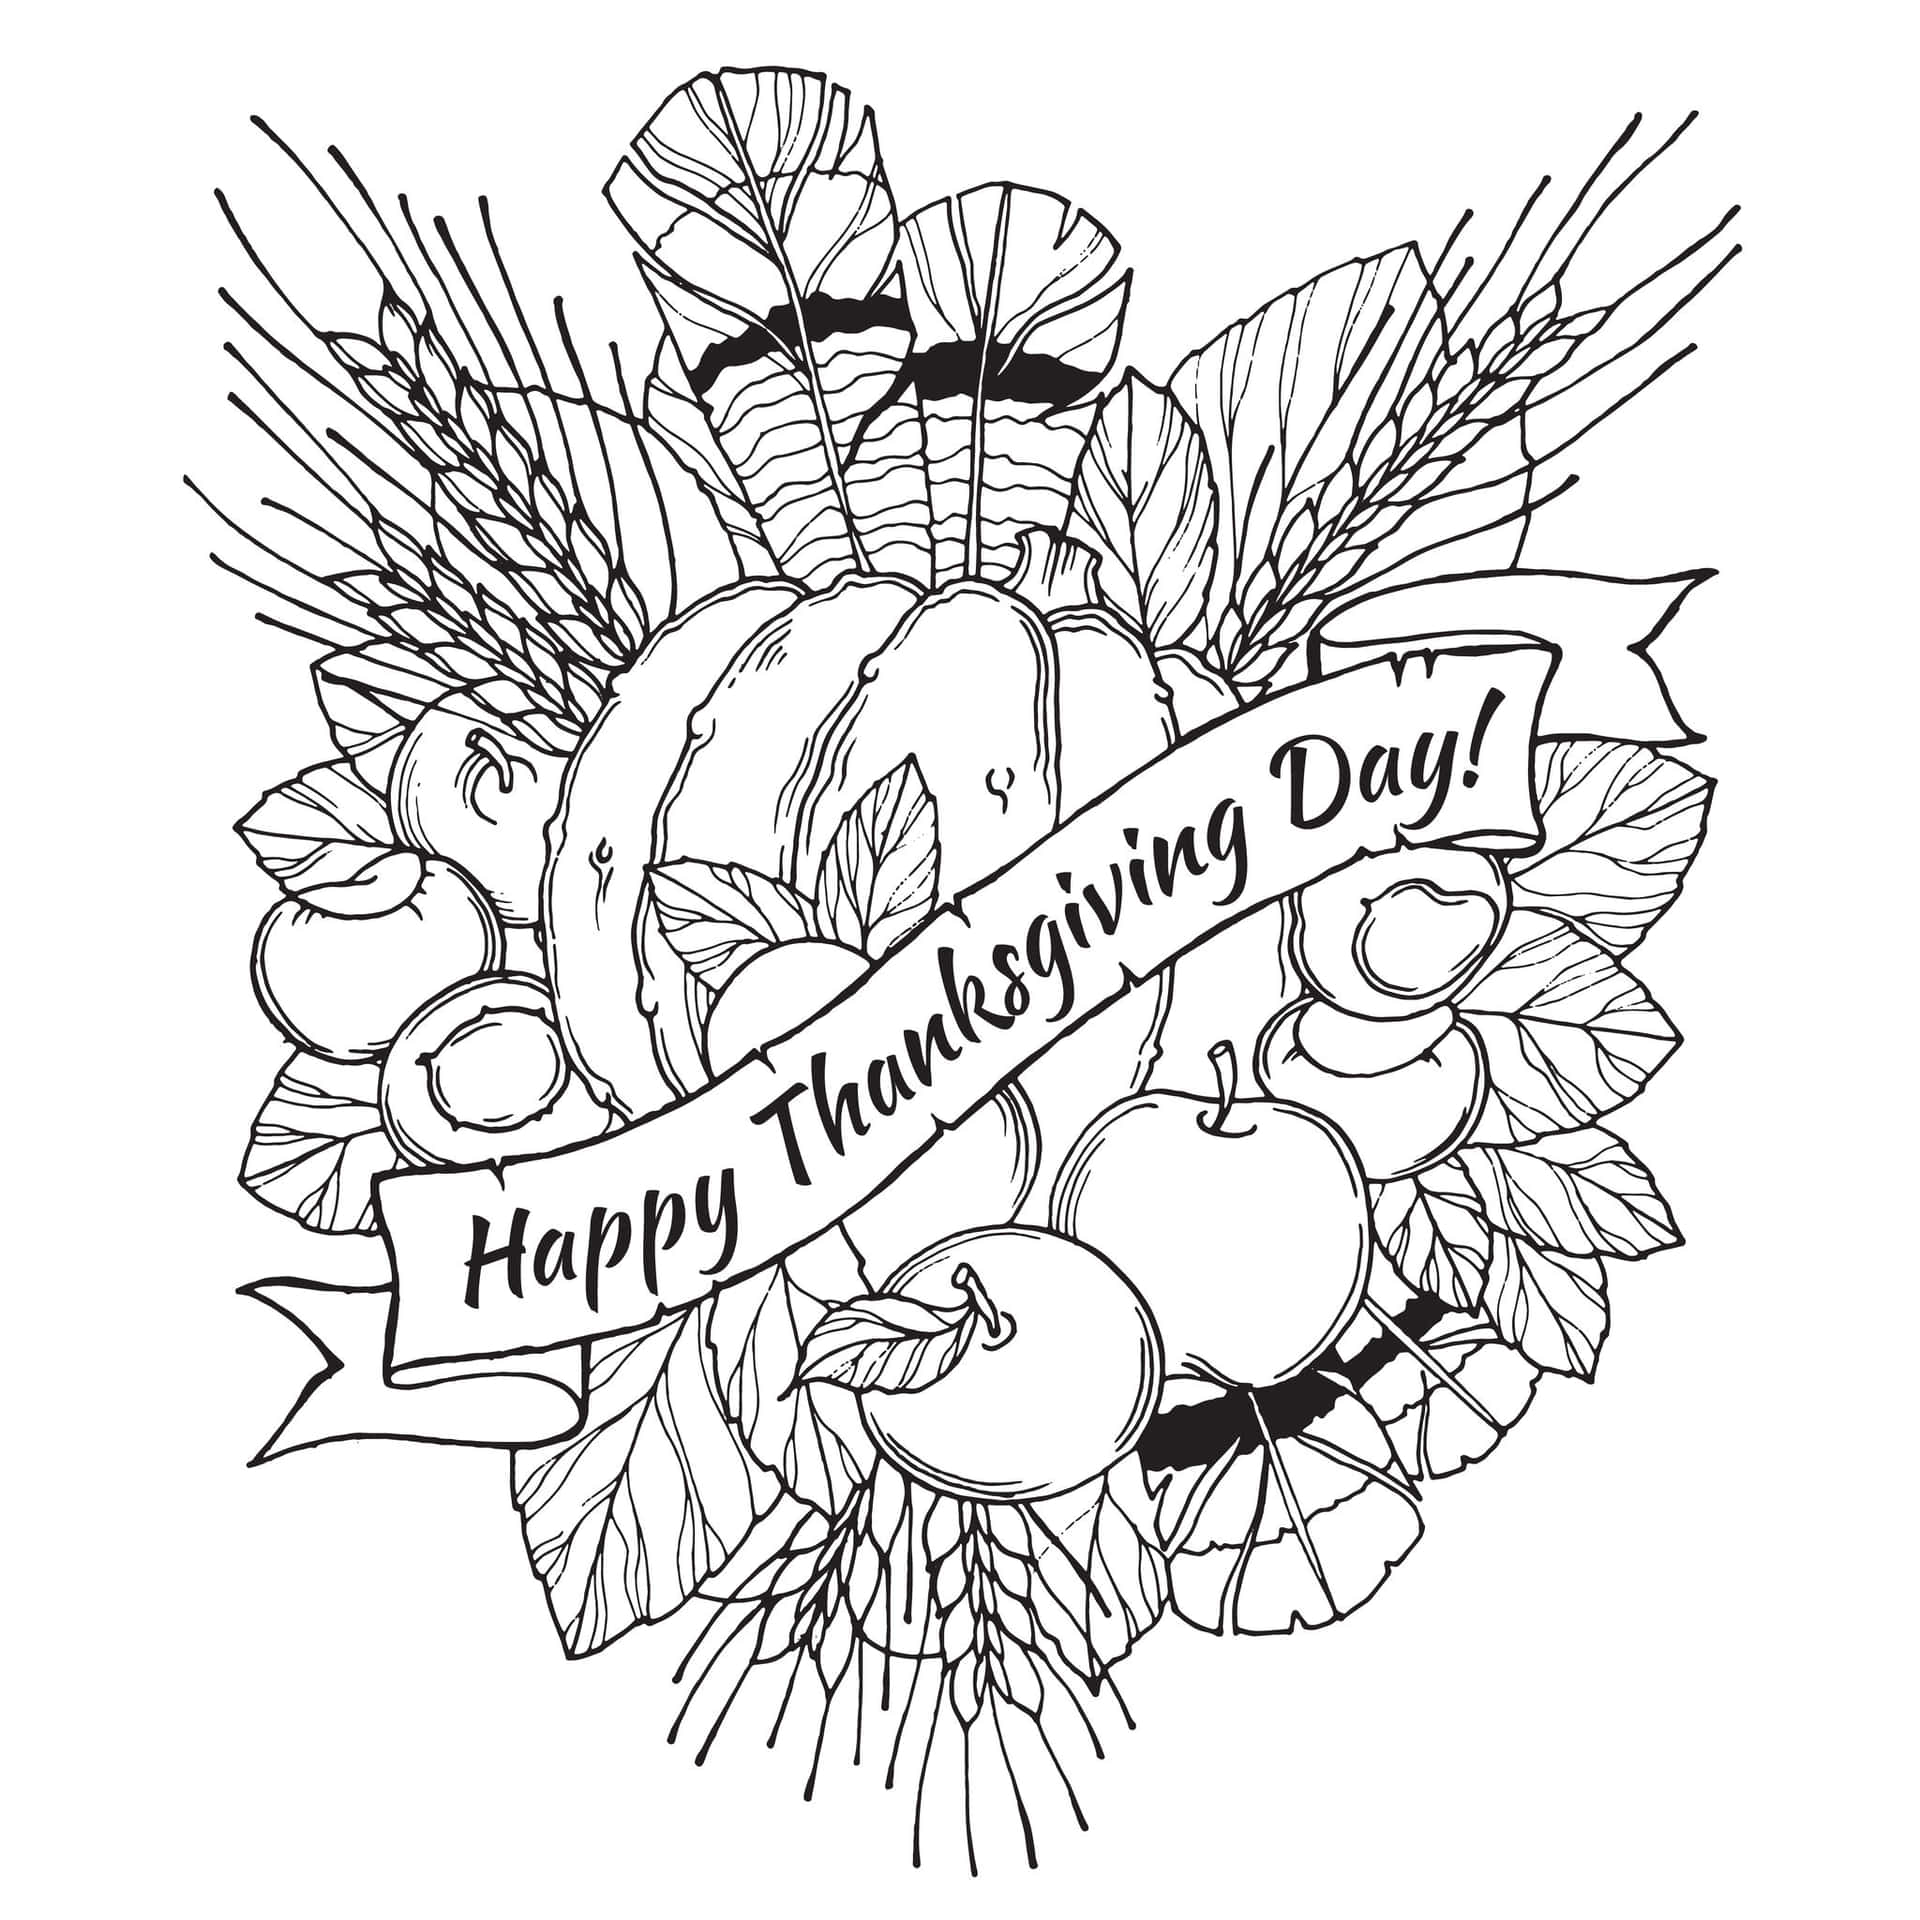 Make it a fun Thanksgiving with a Coloring Craze!